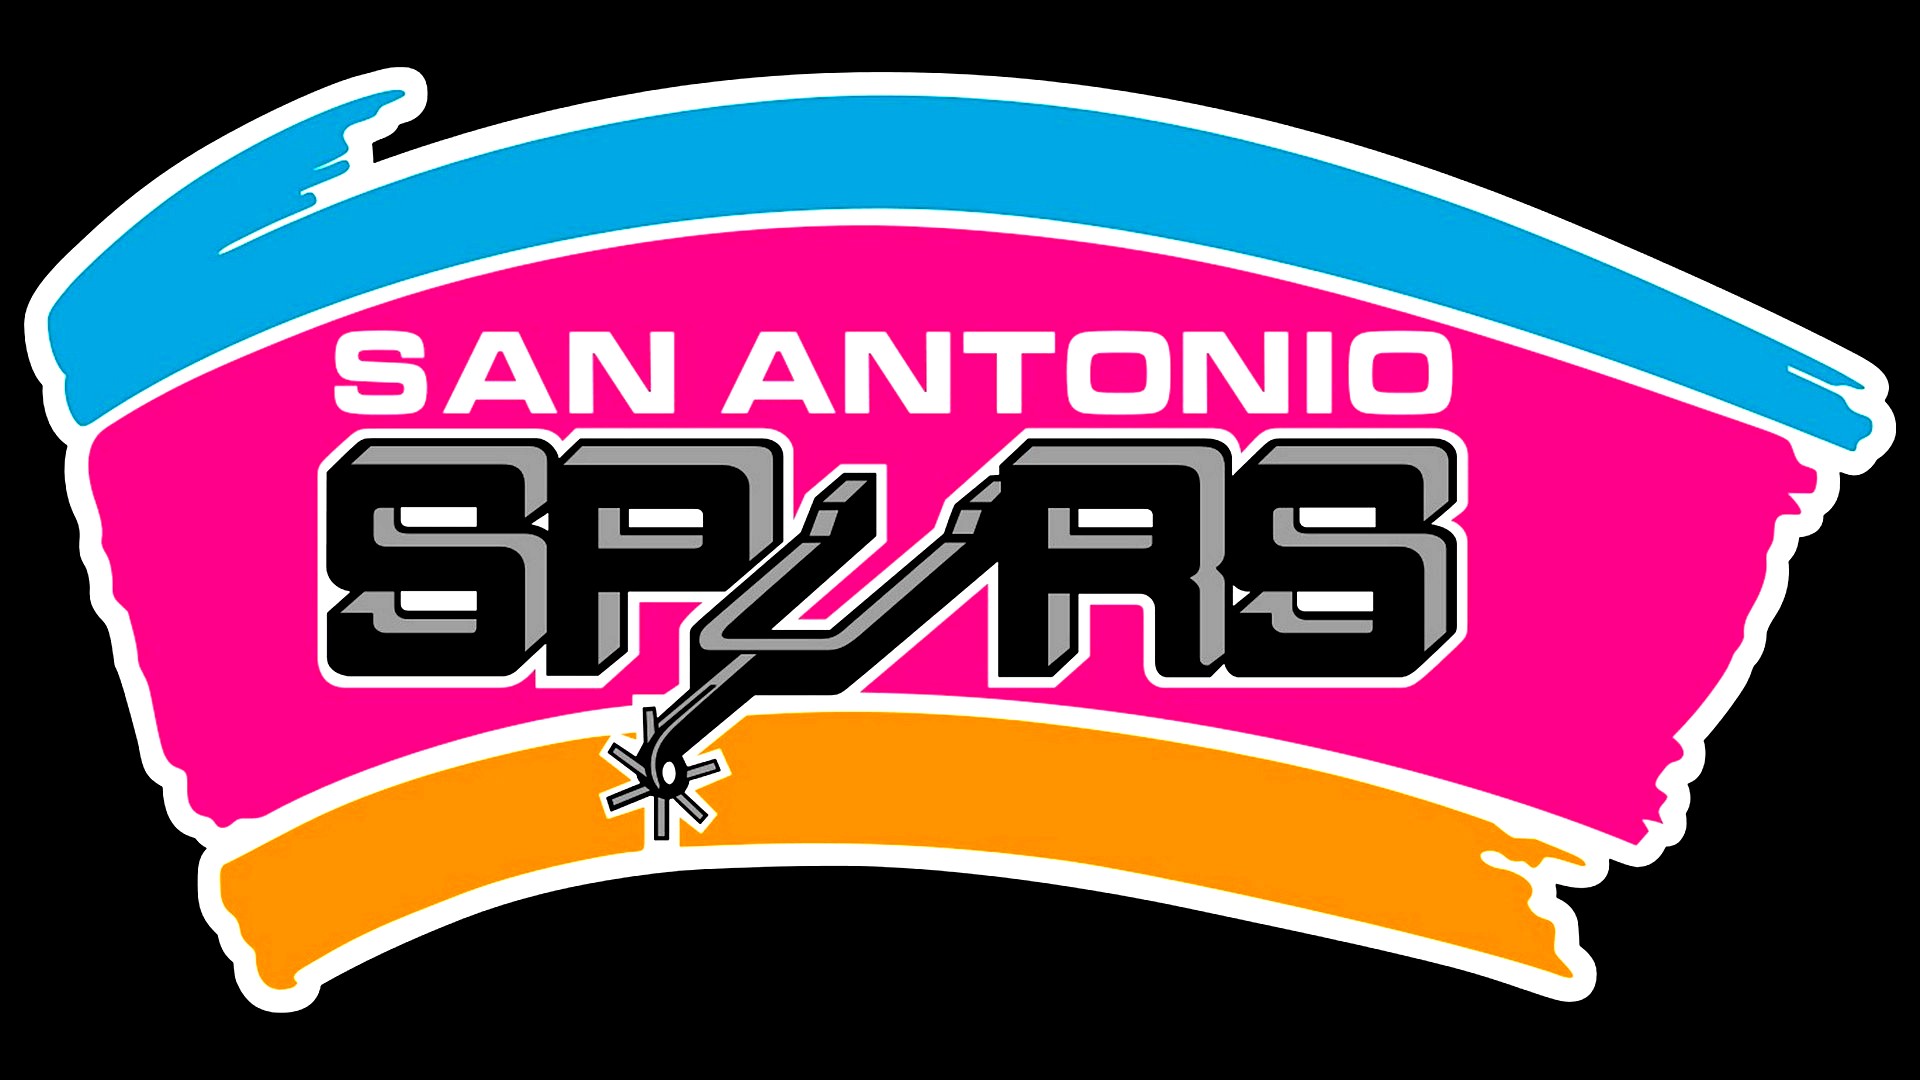 San Antonio Spurs Wallpaper For Mac Backgrounds with high-resolution 1920x1080 pixel. You can use this wallpaper for your Desktop Computer Backgrounds, Windows or Mac Screensavers, iPhone Lock screen, Tablet or Android and another Mobile Phone device